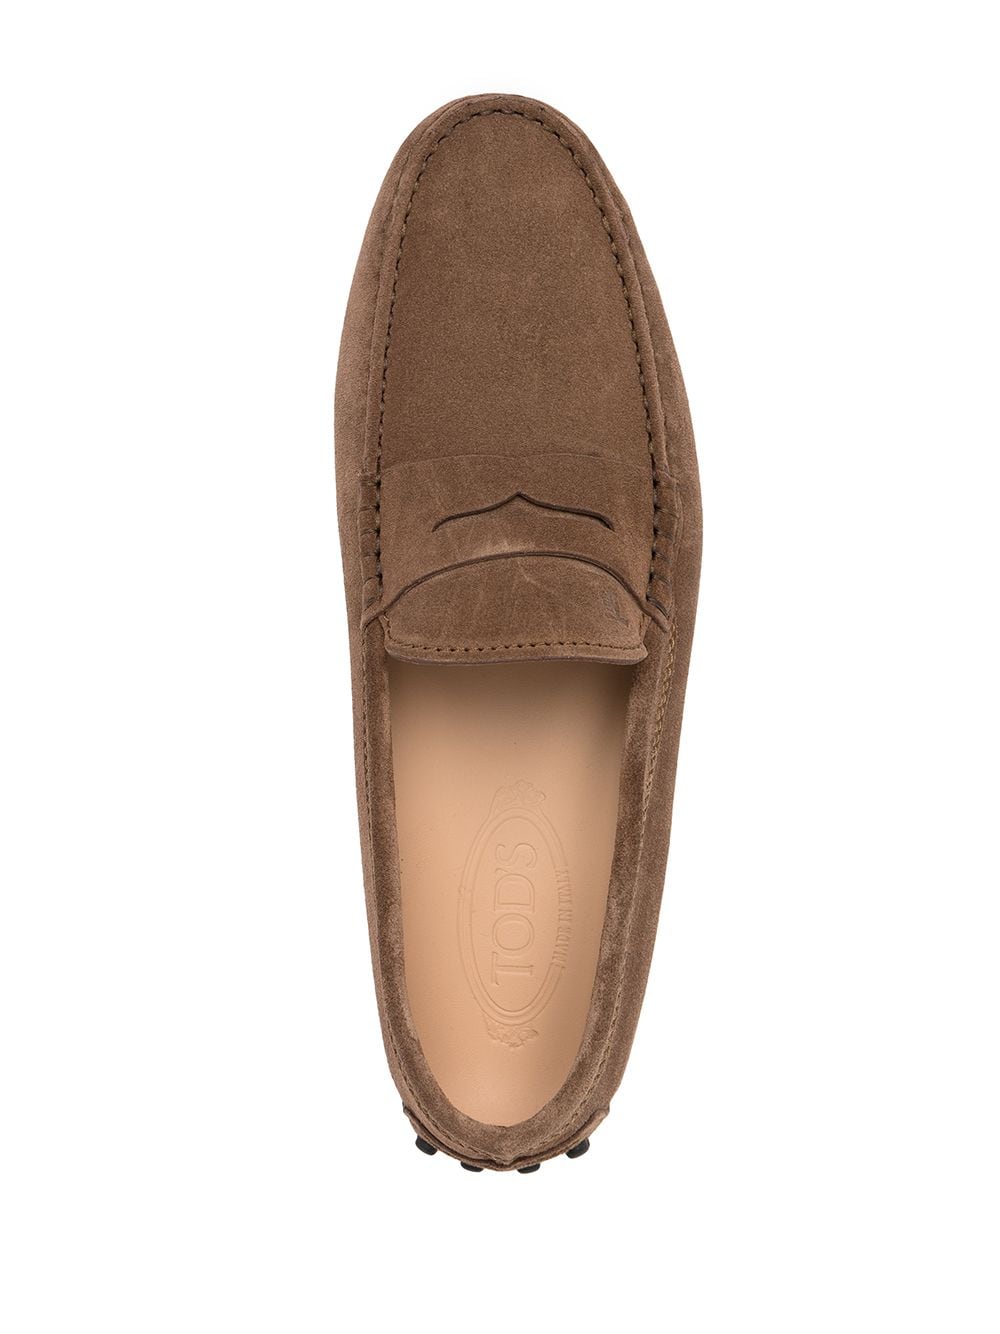 Brown suede Gommino driving loafers